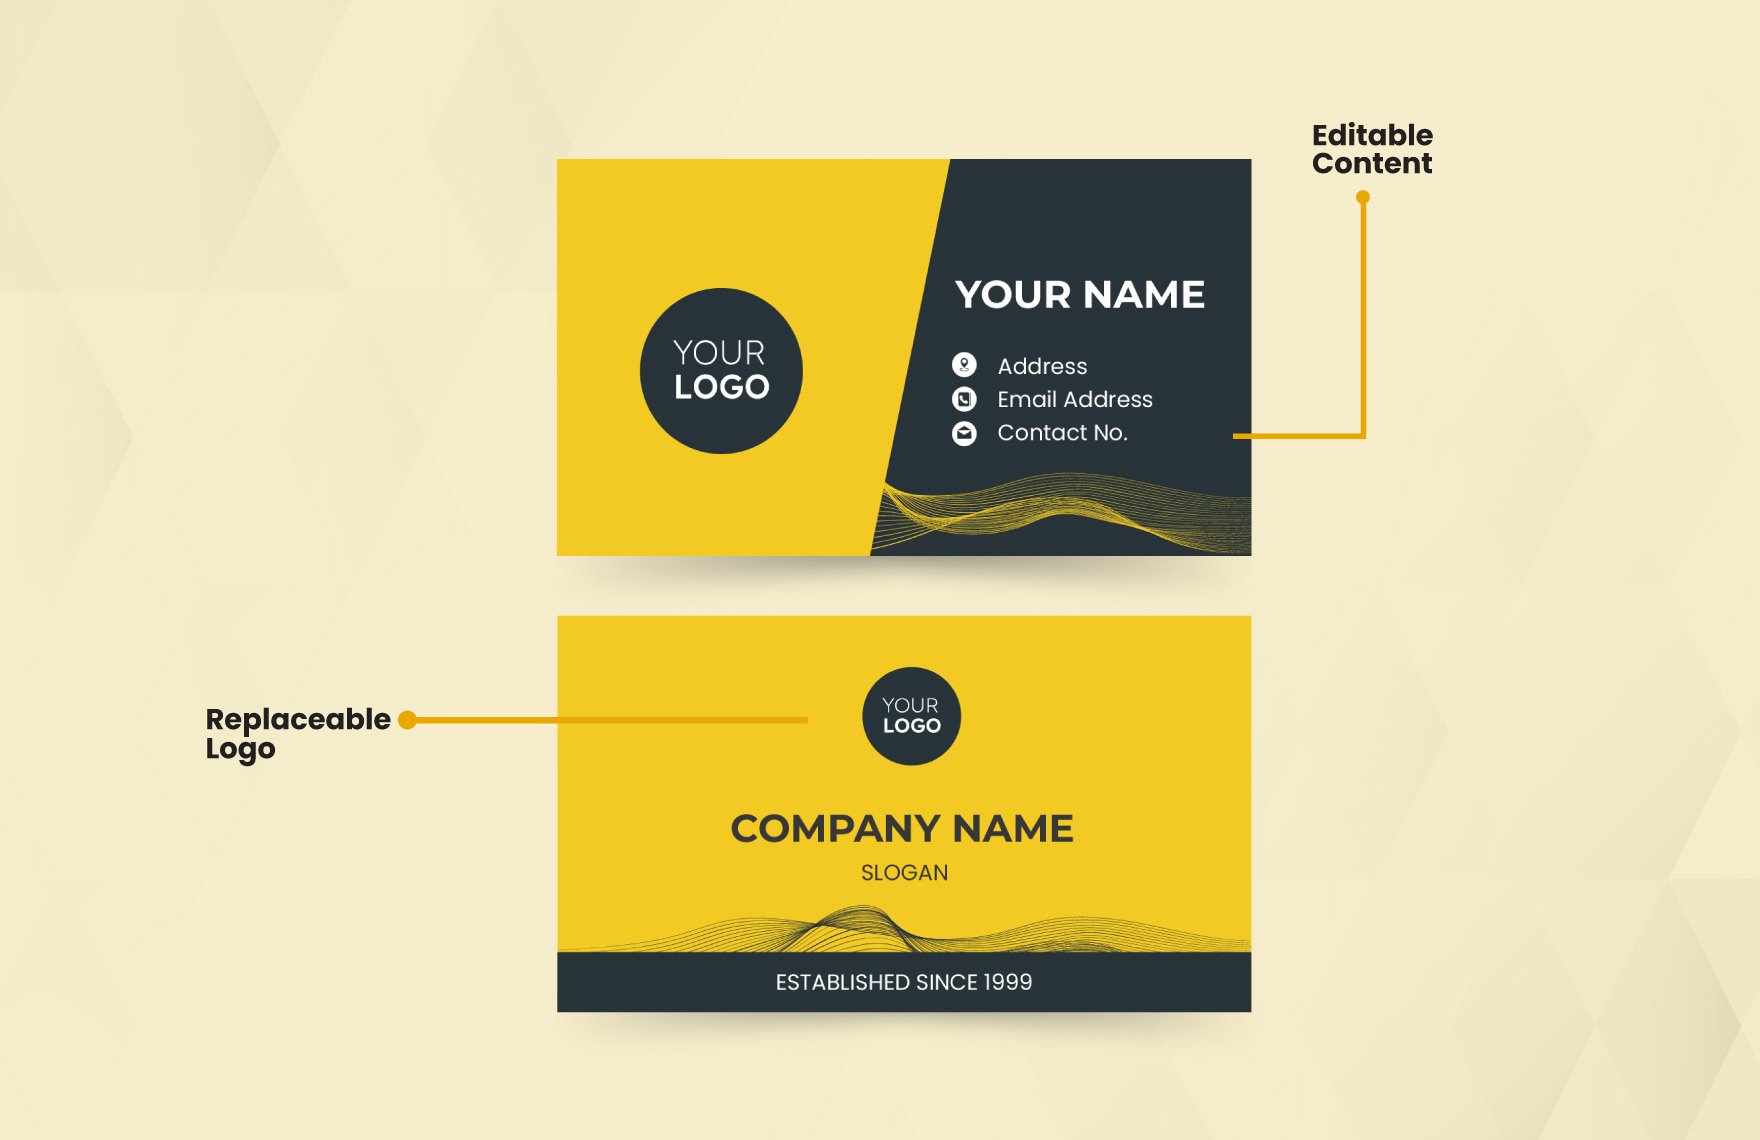 Business Card Background Template